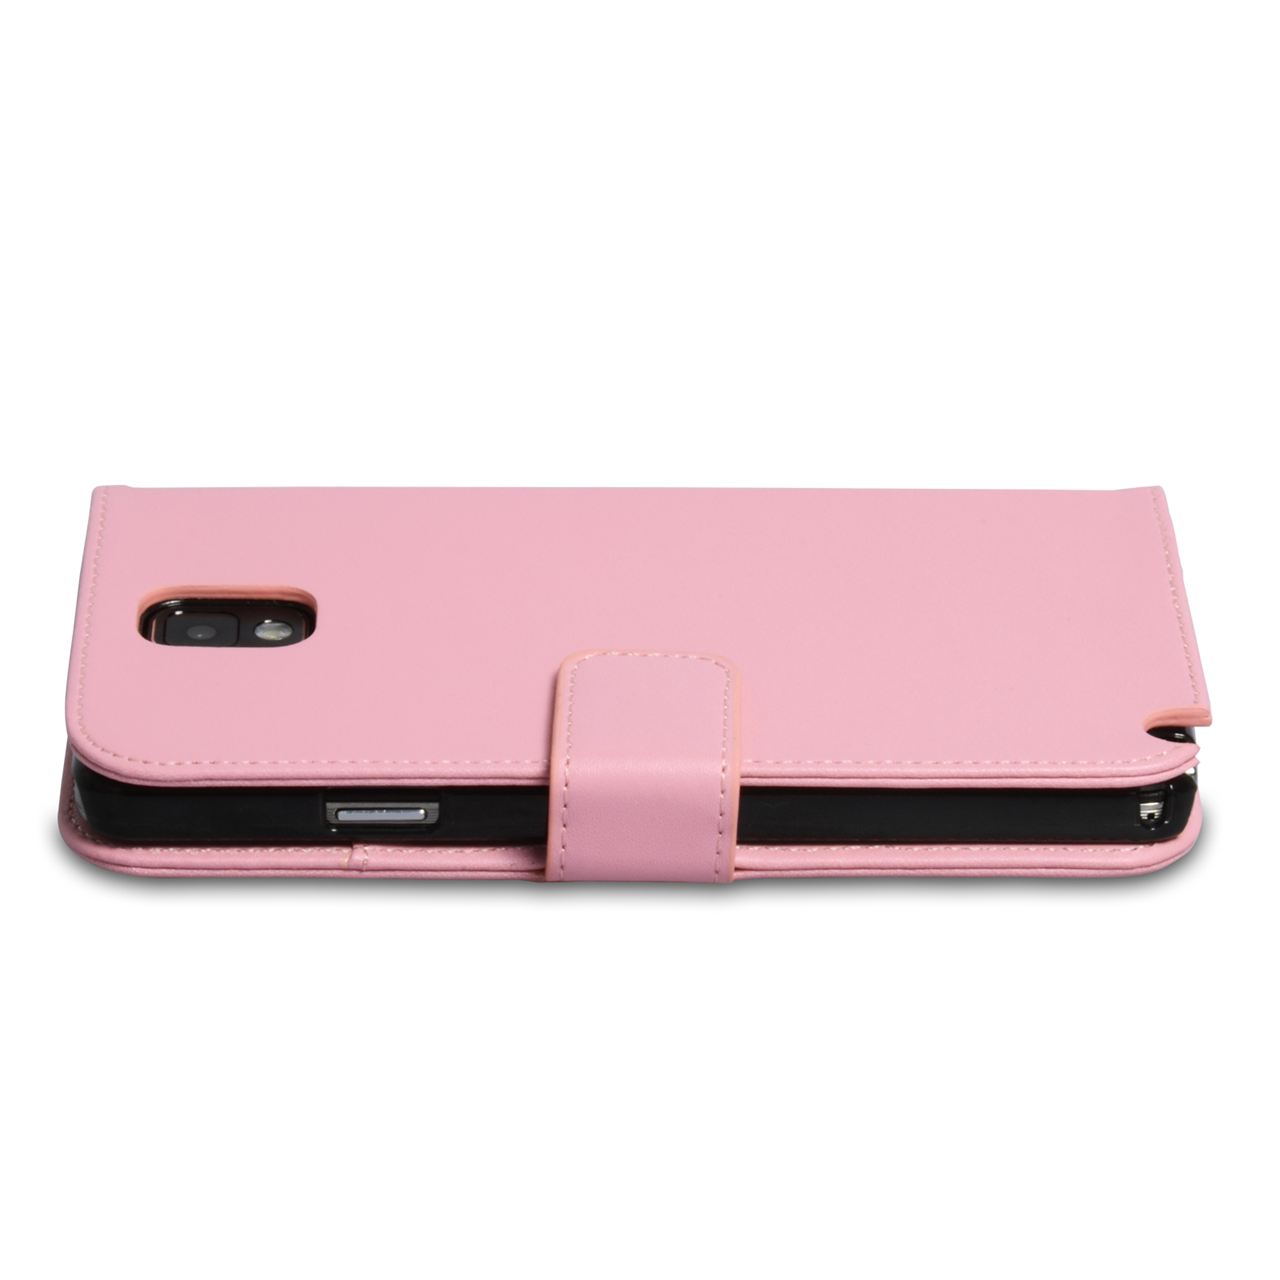 YouSave Samsung Galaxy Note 3 Leather Effect Wallet Case - Baby Pink